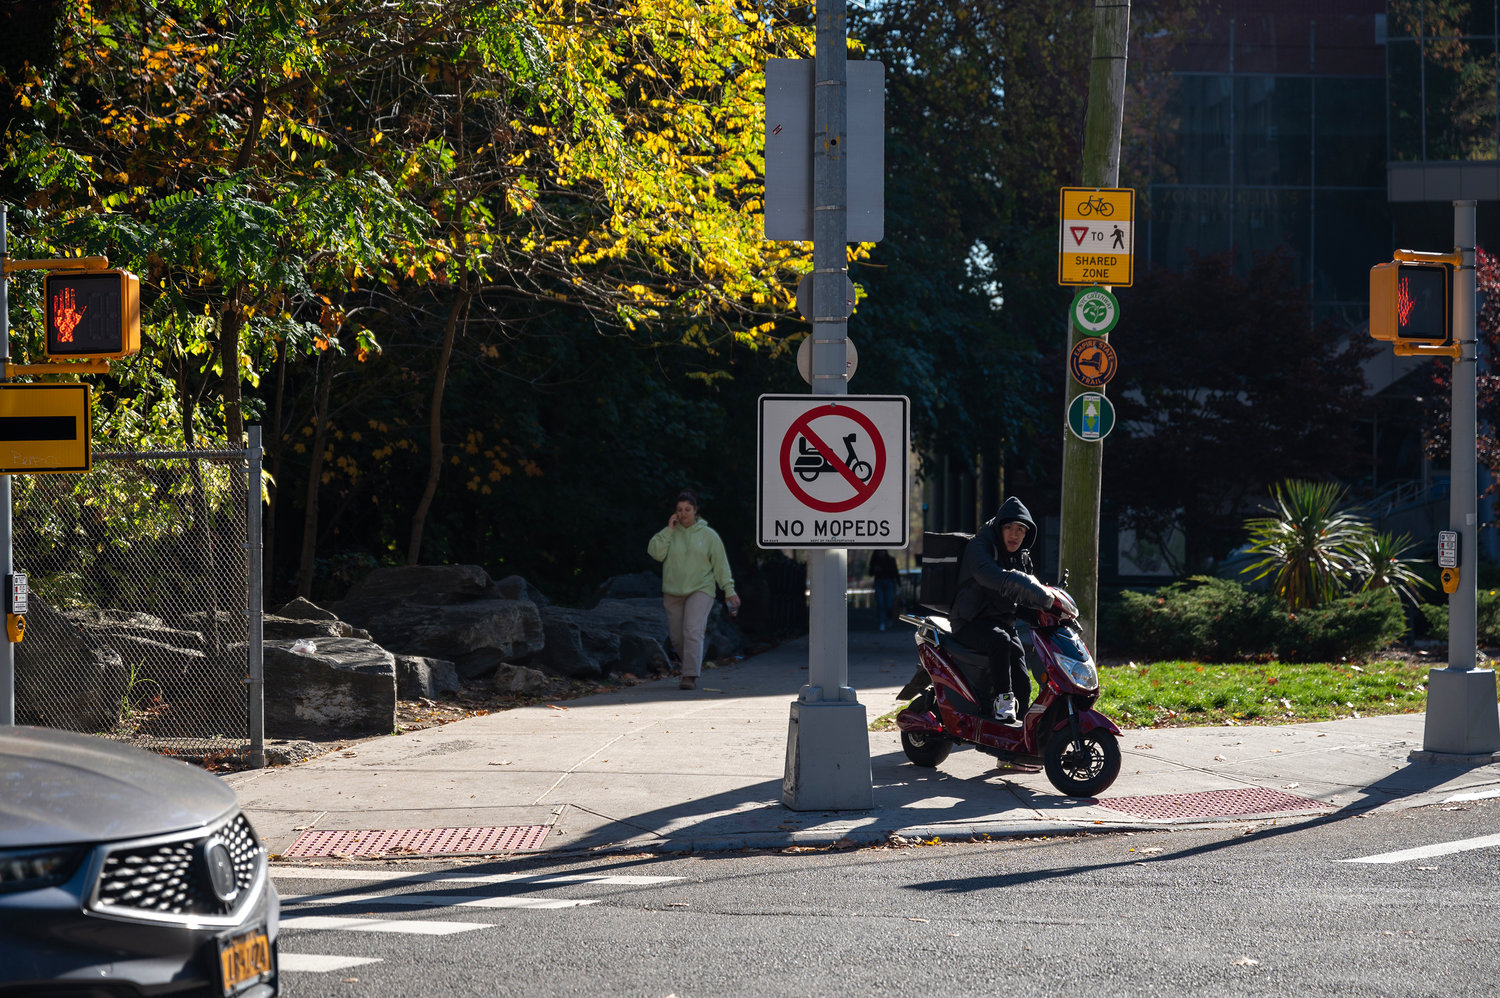 A delivery driver riding a moped on the pathway near Manhattan College’s Kelly Commons is oblivious to the “No Moped” sign that was recently put up there.